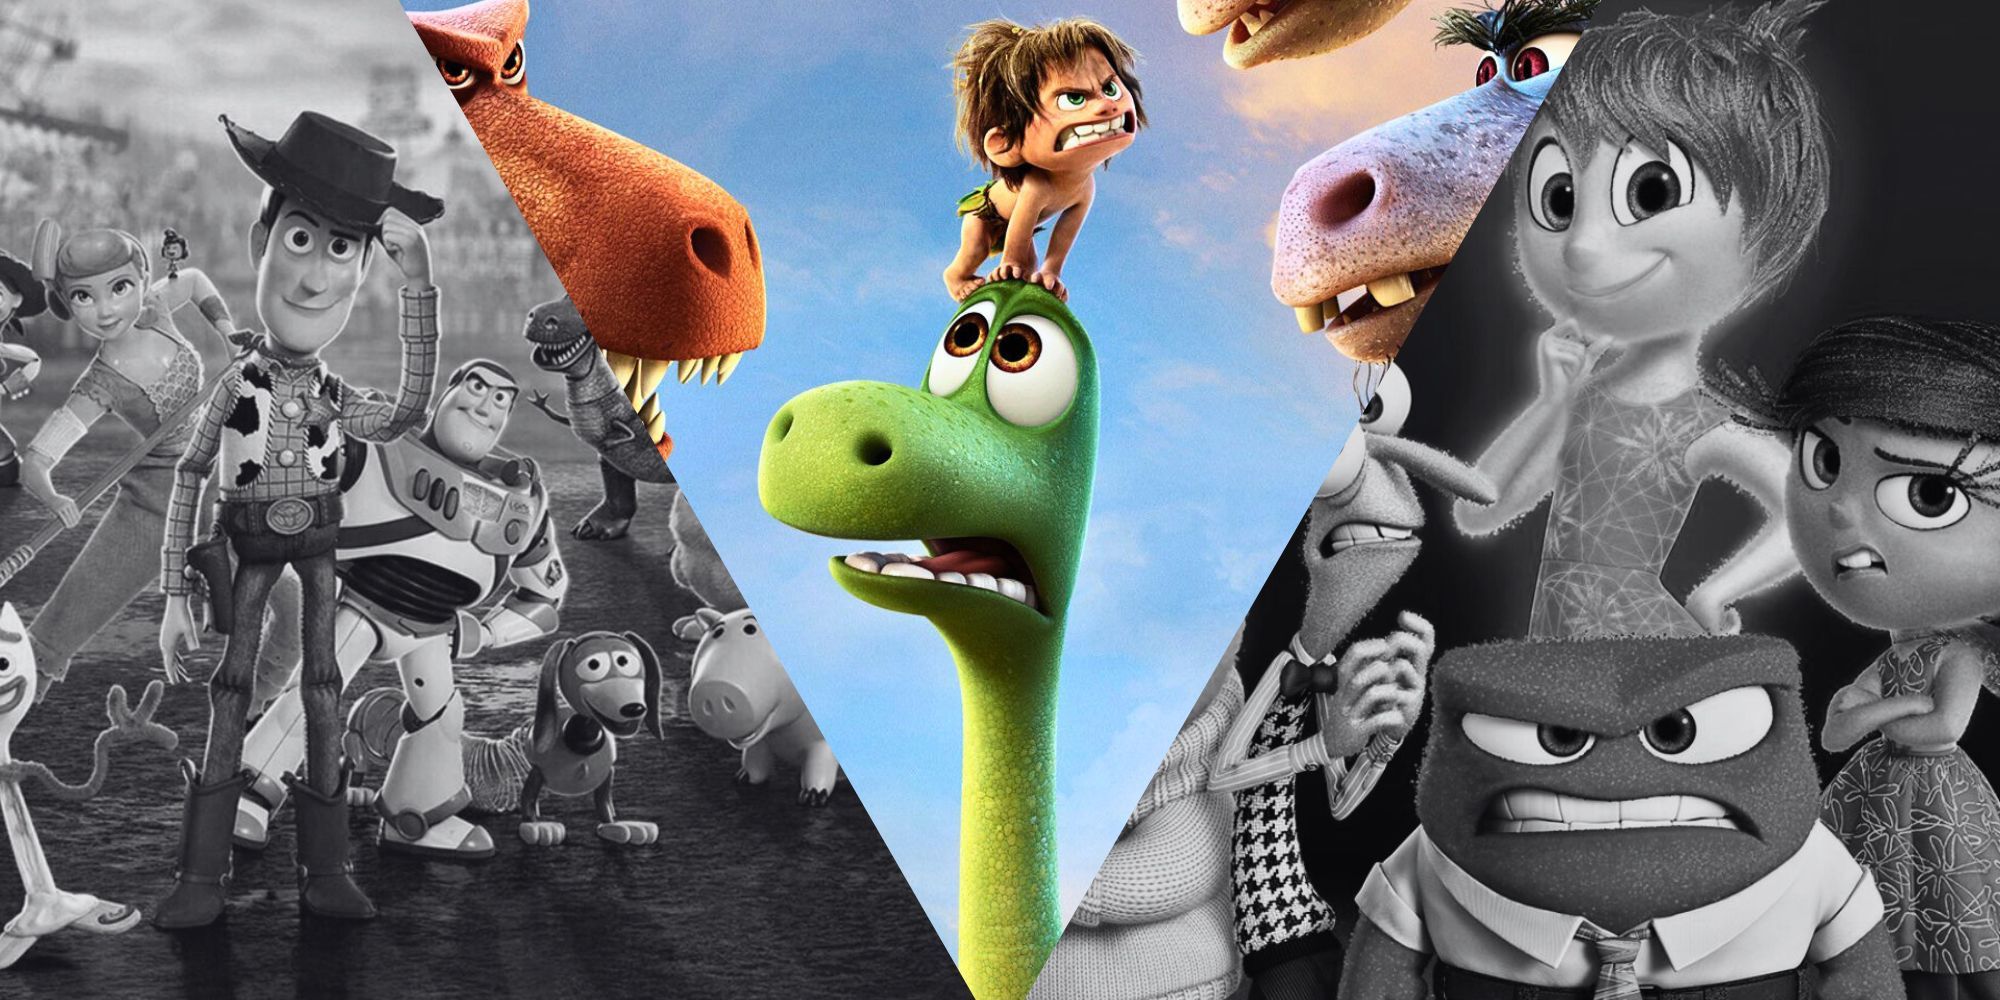 The Pixar Movie With The Most Exciting Sequel Potential Isn’t The 1 You